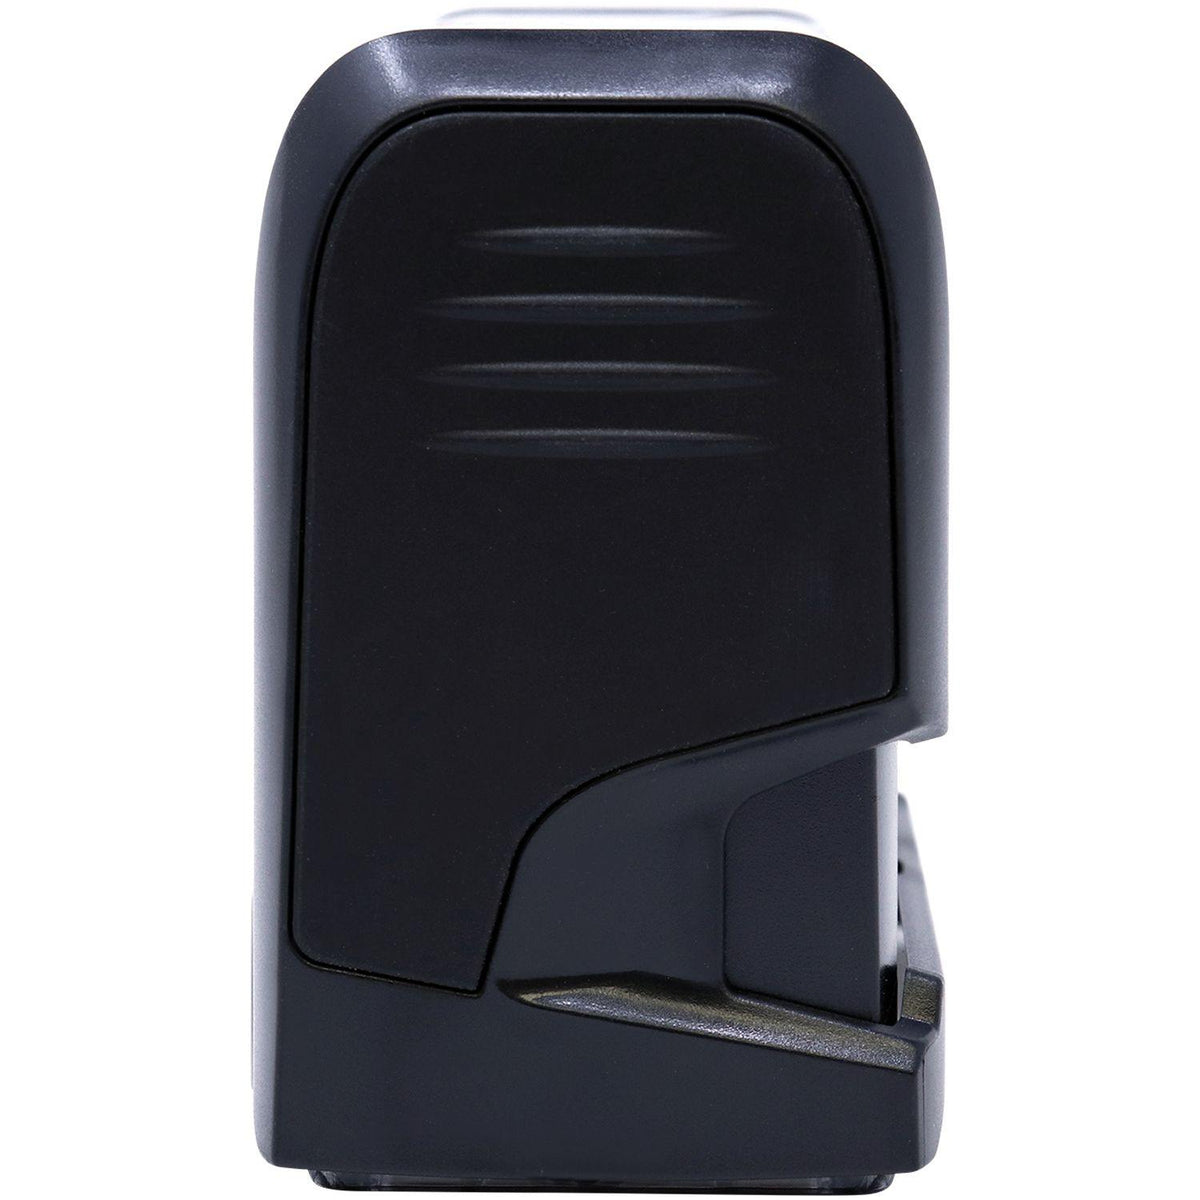 Self-Inking Barcode Confidential Stamp - Engineer Seal Stamps - Brand_Trodat, Impression Size_Small, Stamp Type_Self-Inking Stamp, Type of Use_Finance, Type of Use_Legal, Type of Use_Office